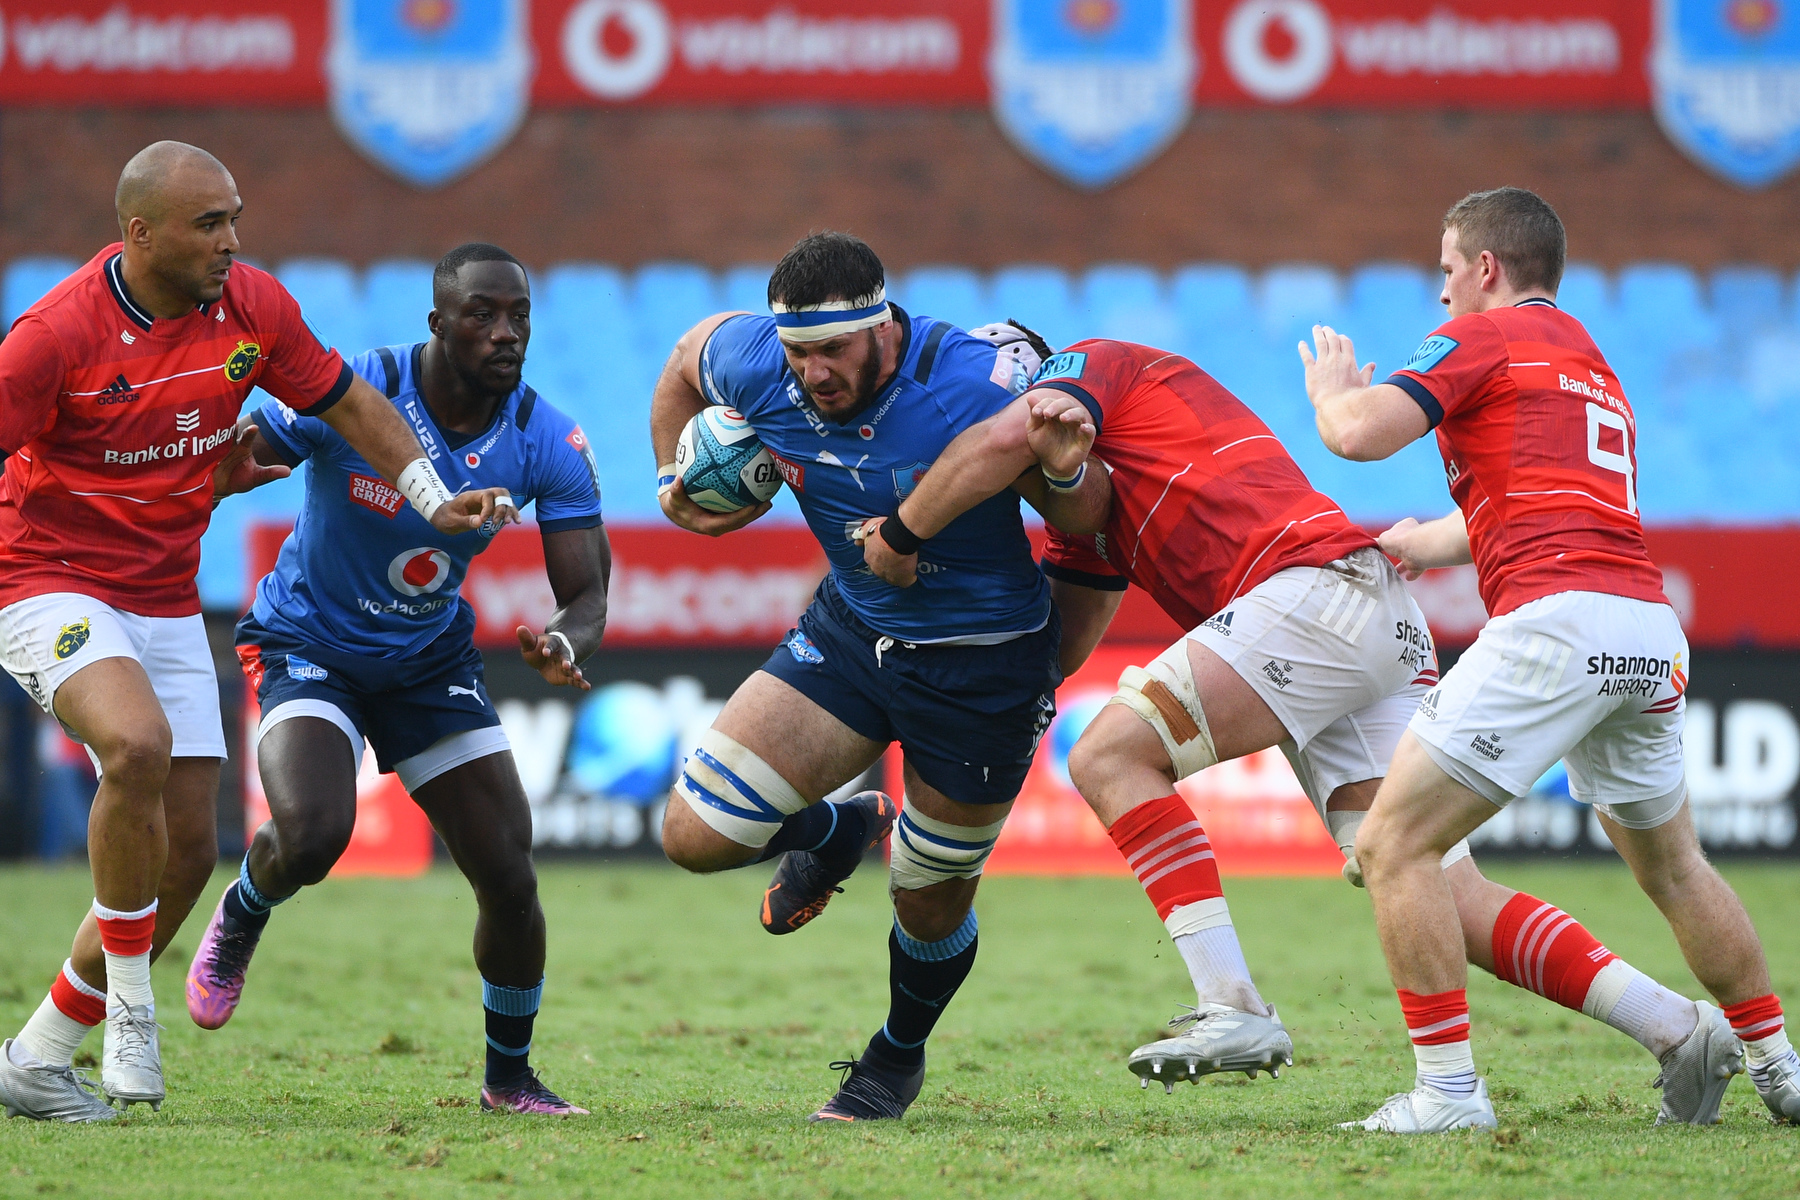 Vodacom Bulls ready to bag points and make a point against Benetton